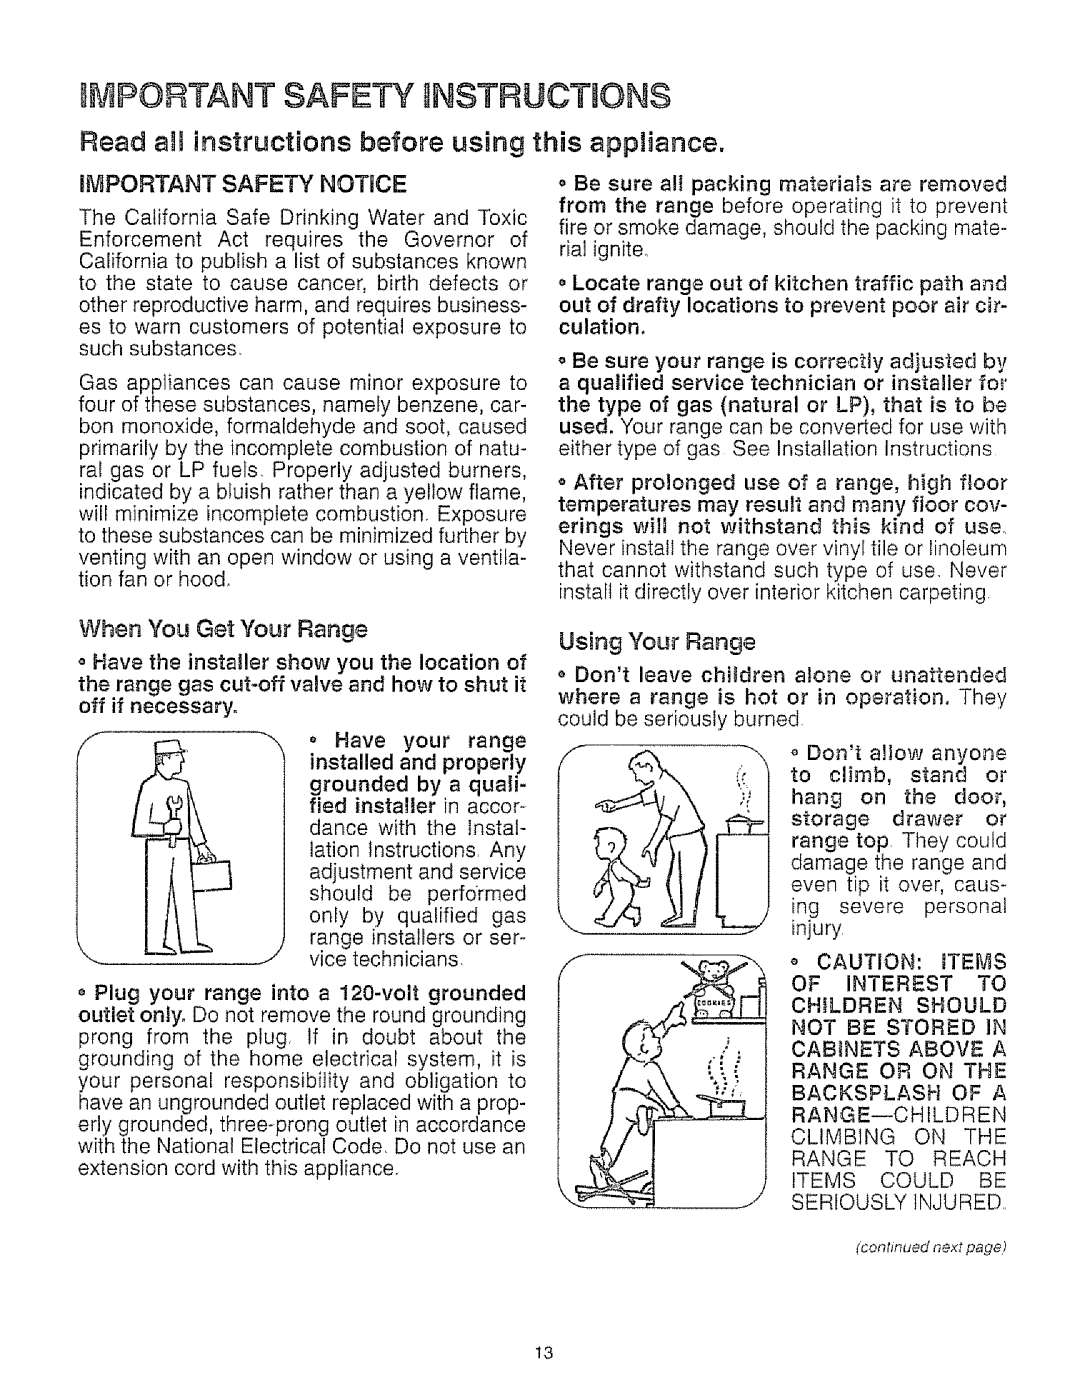 Kenmore 73515 Important Safety Nstruct Ons, Read aH instructions before using this appliance, nMPORTANT SAFETY NOTICE 